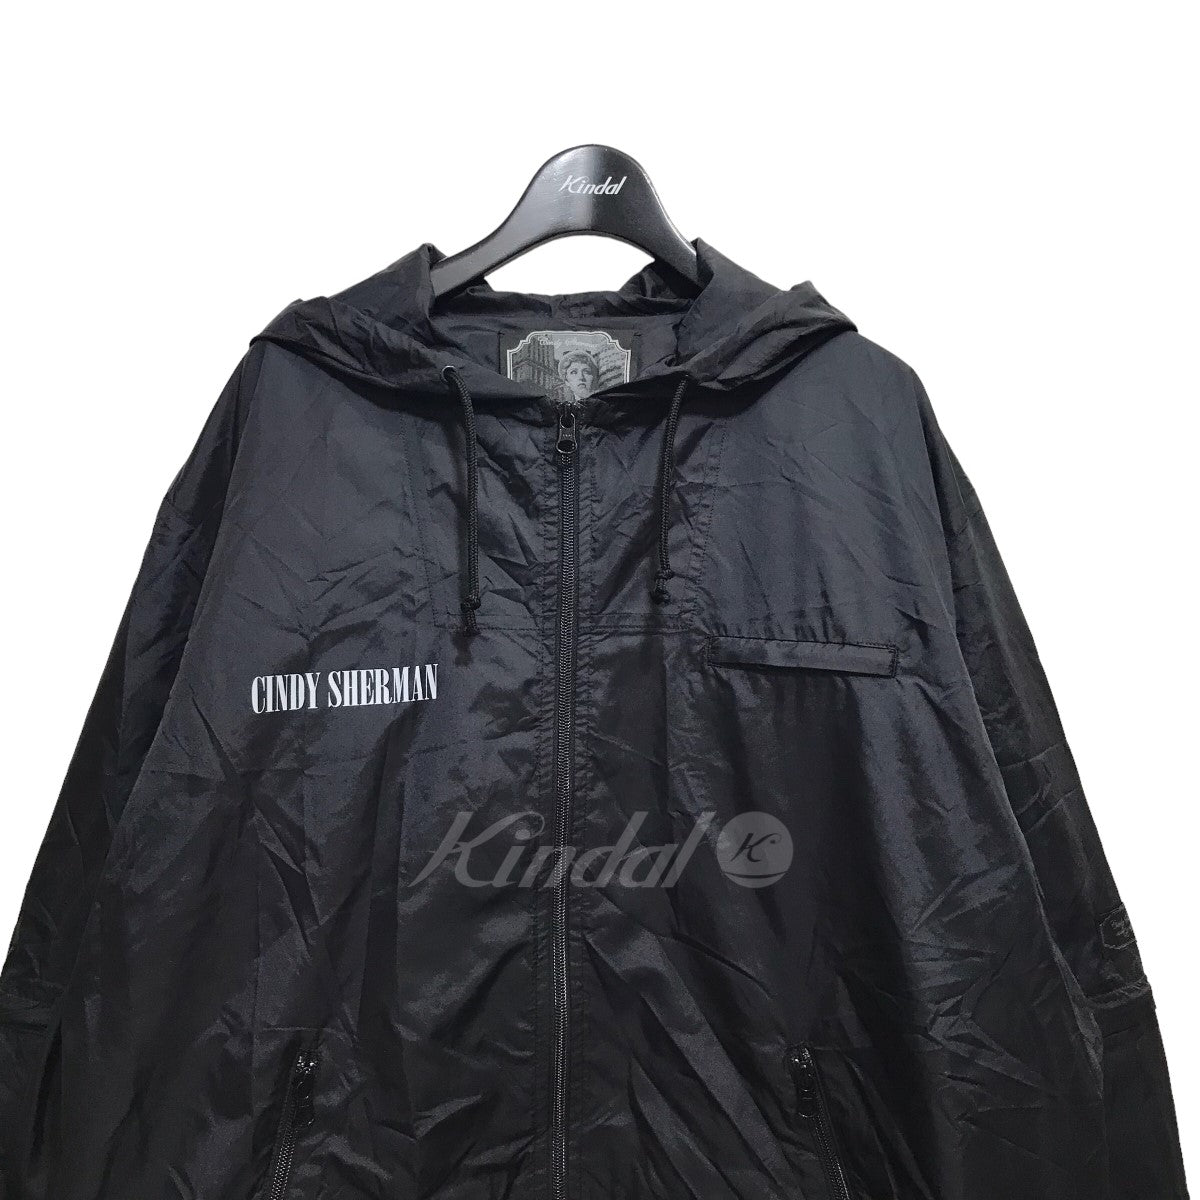 UNDERCOVER(アンダーカバー) 20SS 「CINDY SHERMAN HOODED ZIP-OFF 